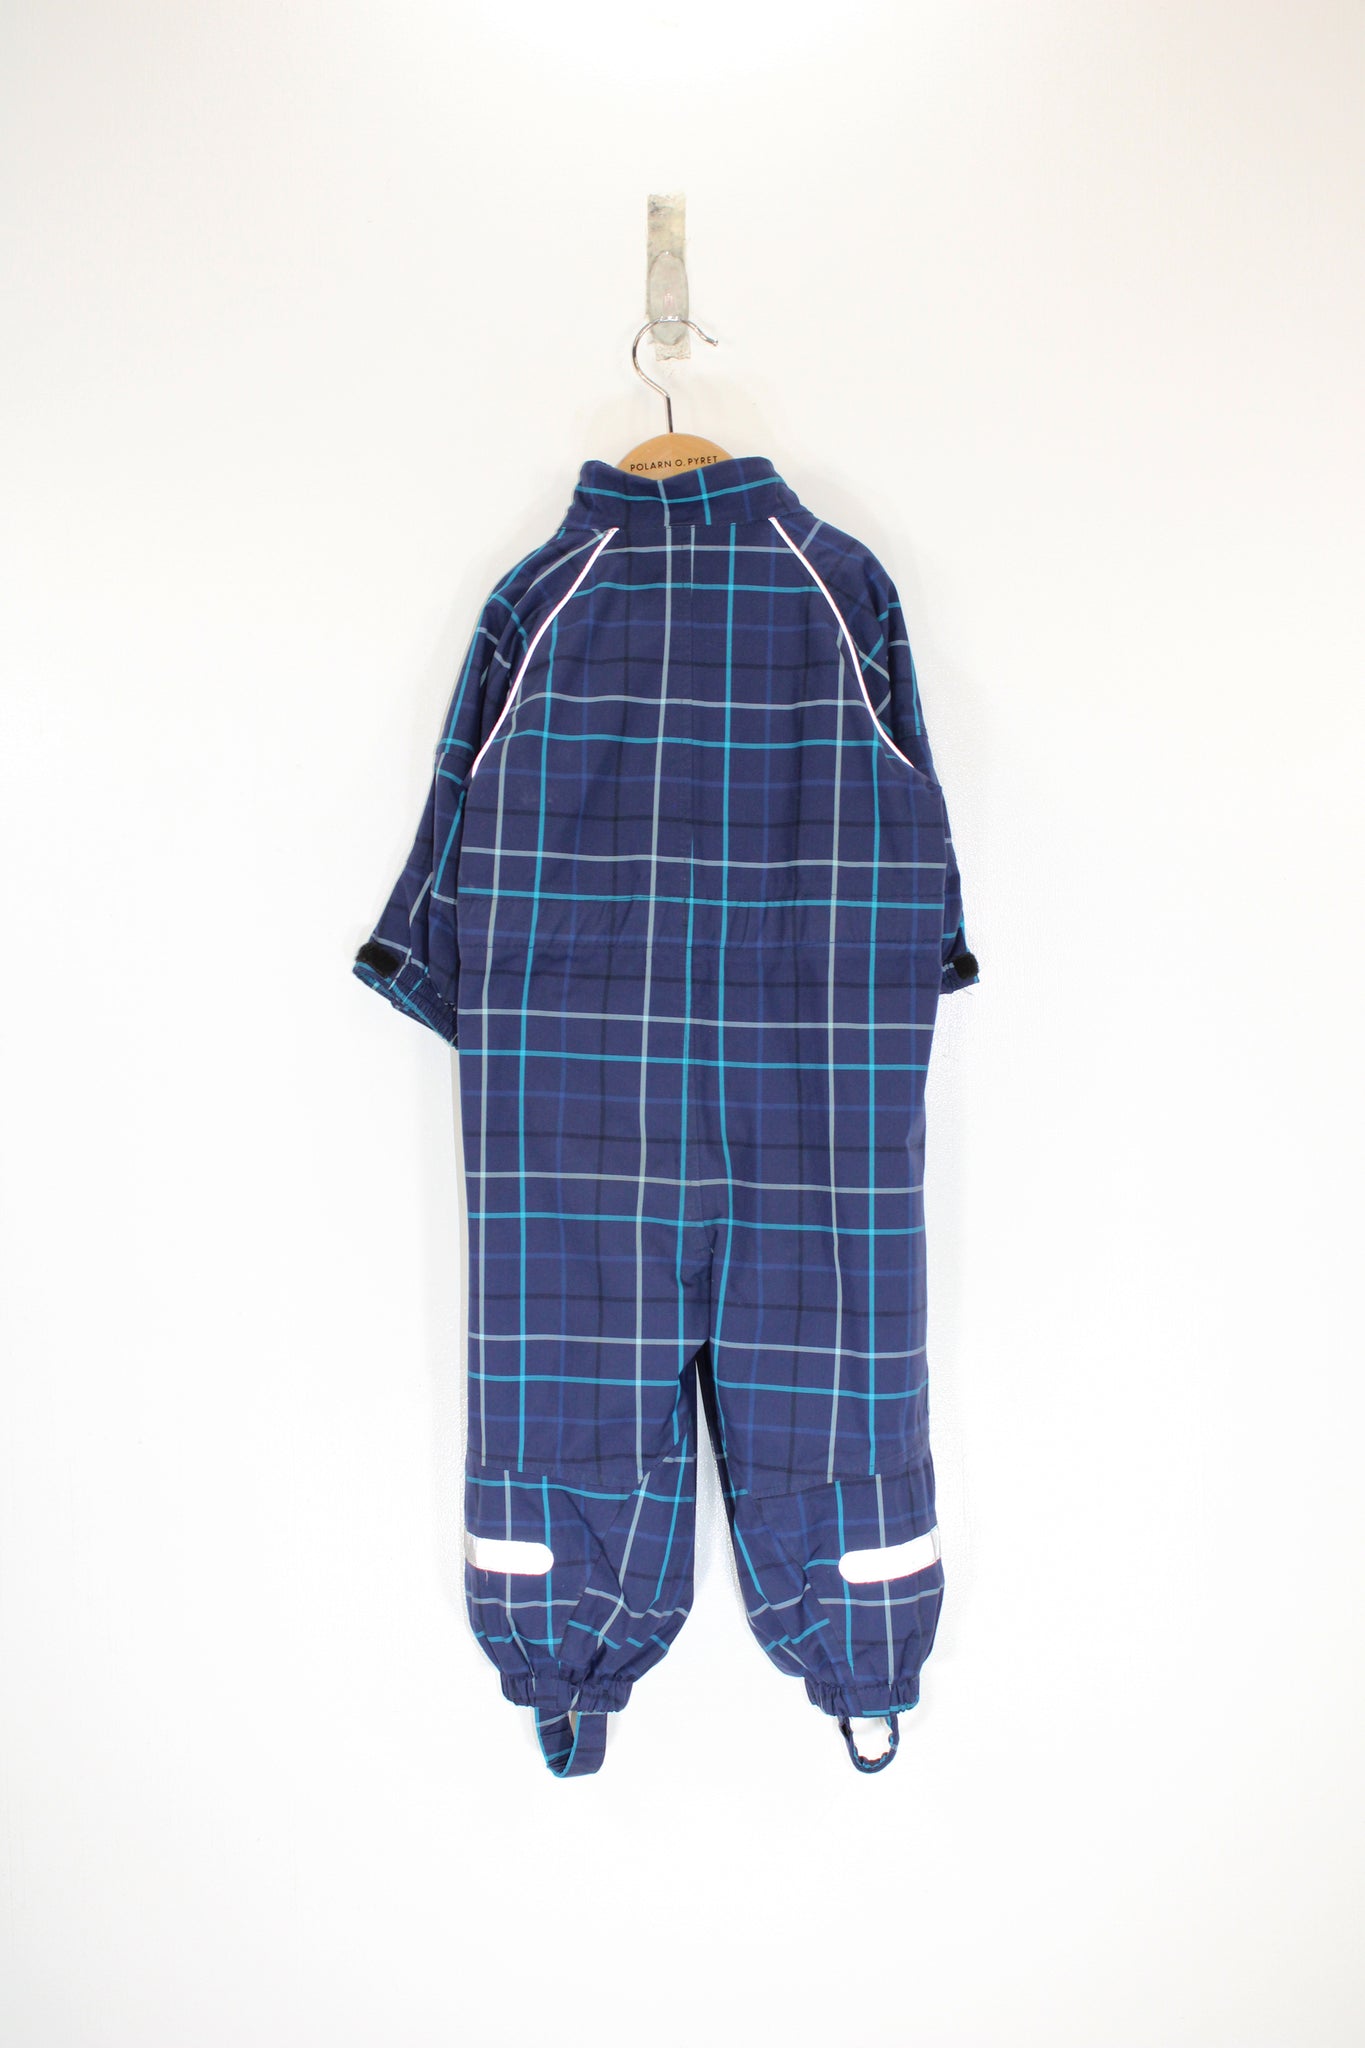 Baby Padded Overalls 9-12m / 80